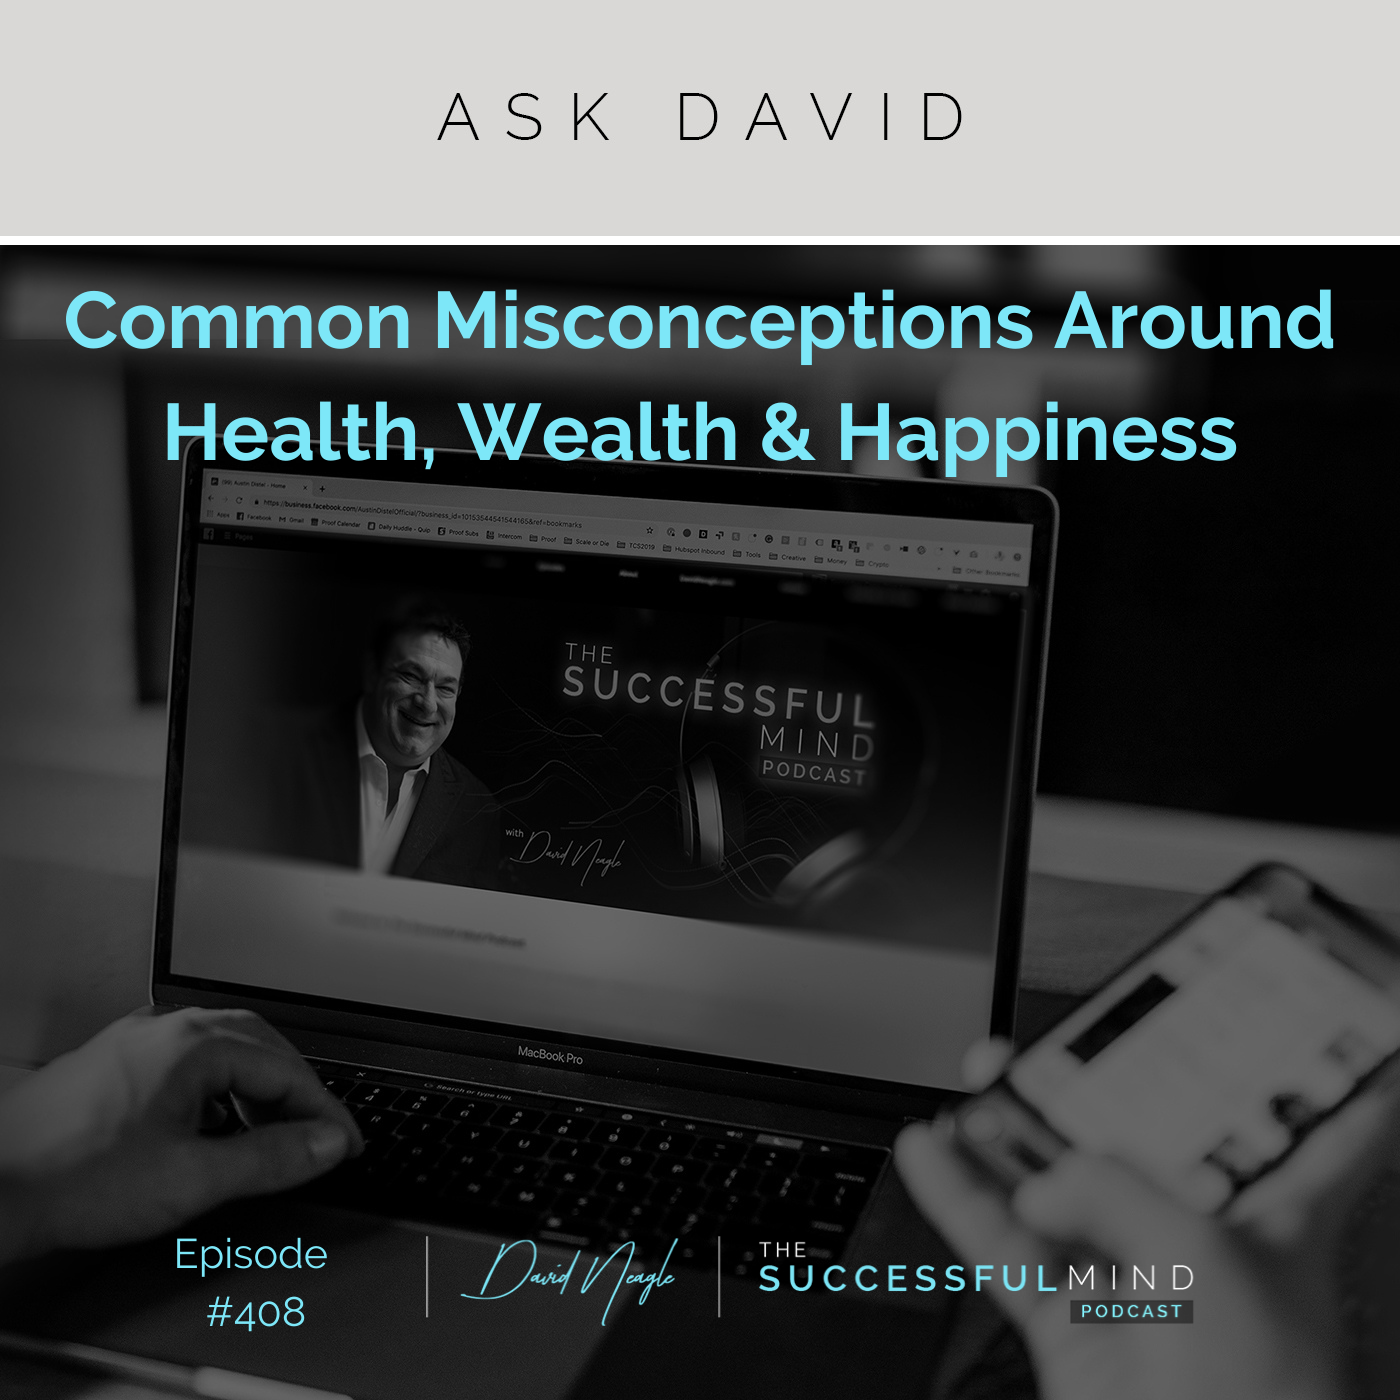 The Successful Mind Podcast - Episode 408 - Common Misconceptions Around Health, Wealth & Happiness